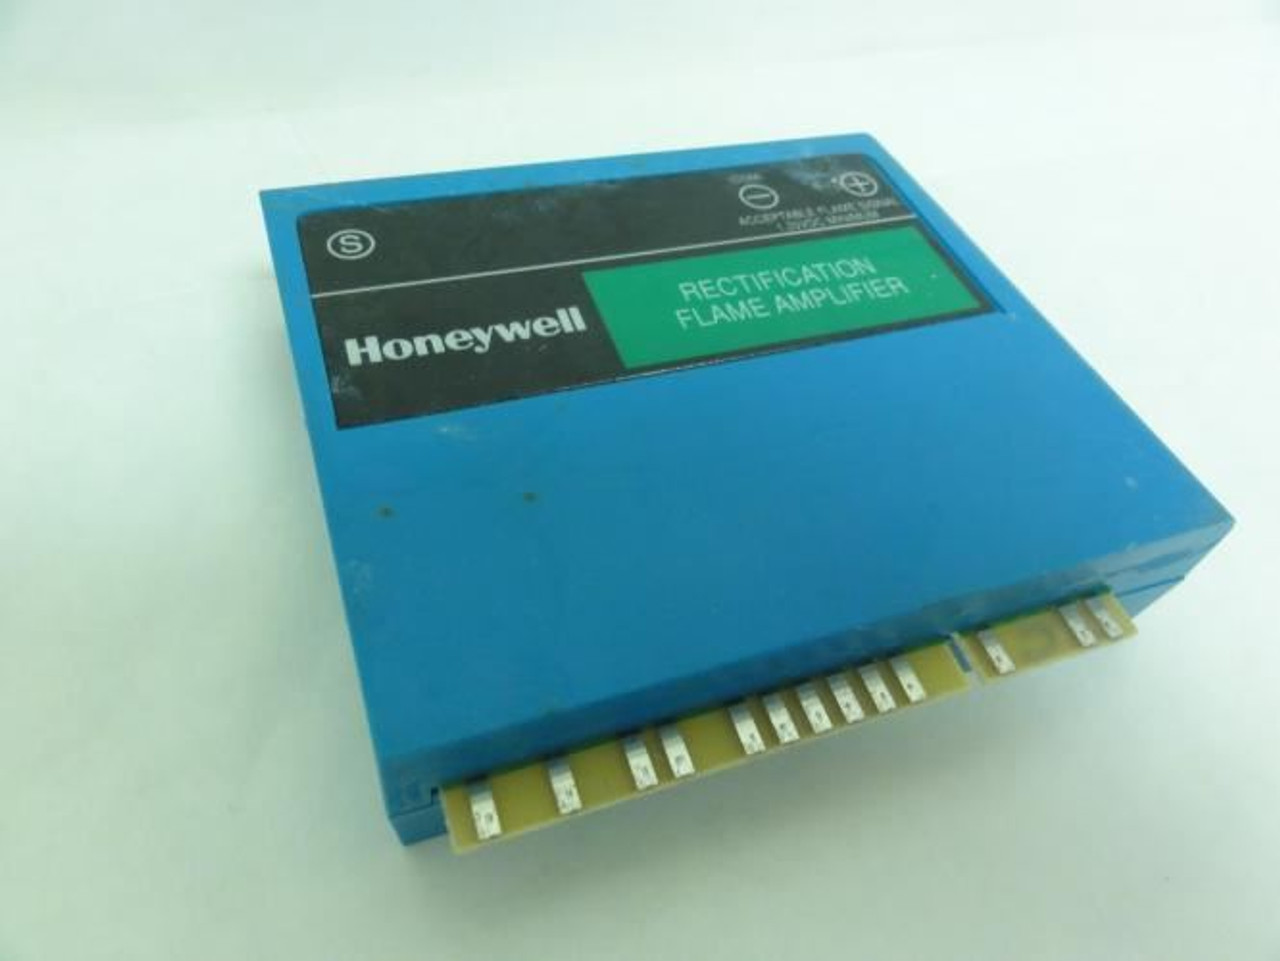 Honeywell R7847-A-1033; Rectification Flame Amplifier; 3 sec.